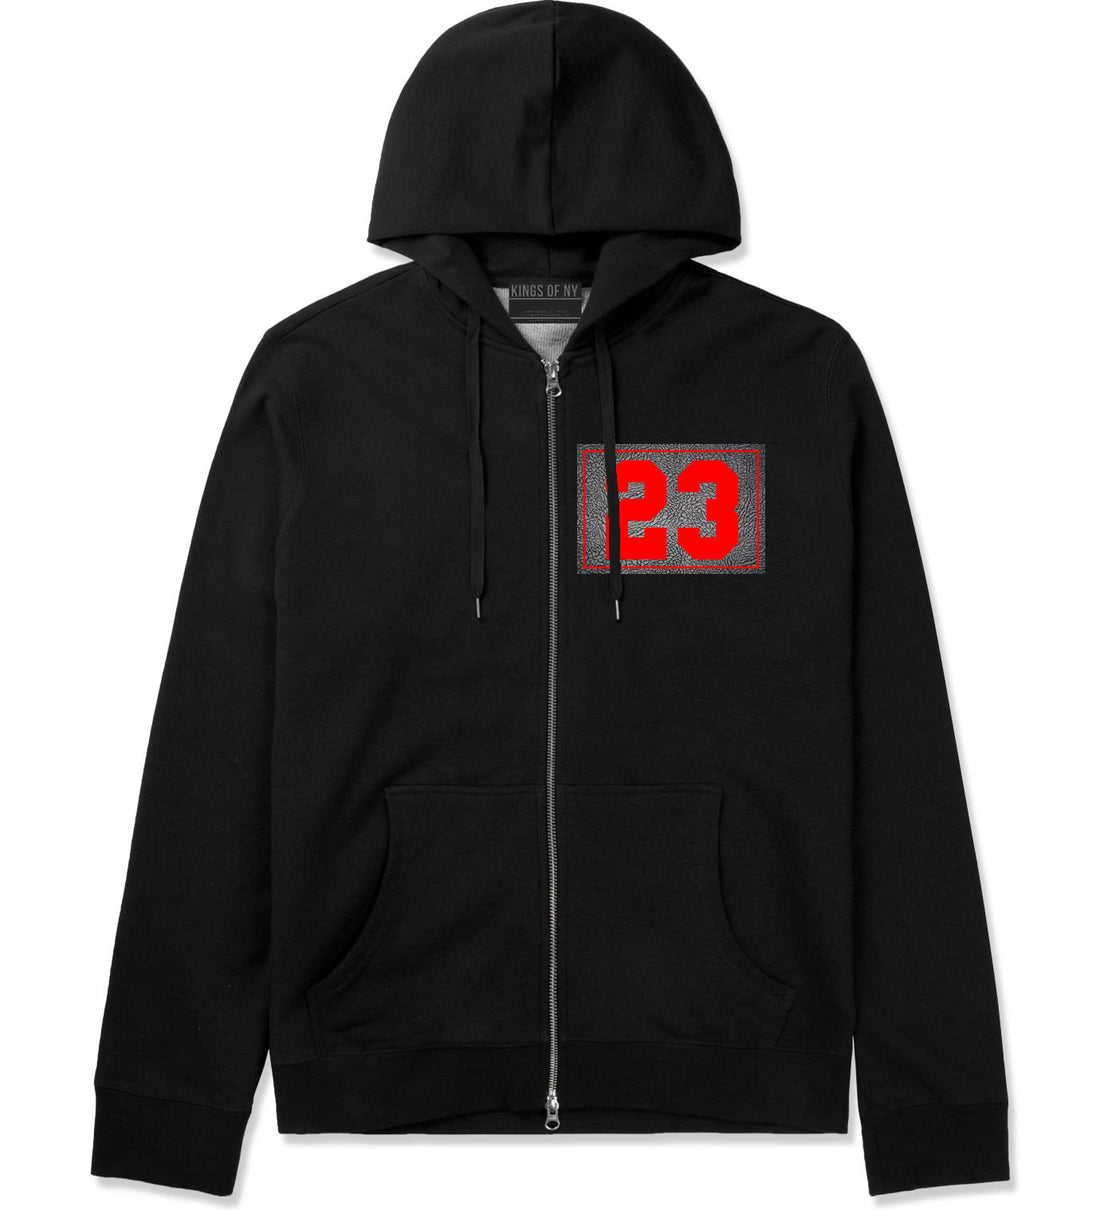 23 Cement Red Jersey Zip Up Hoodie in Black By Kings Of NY